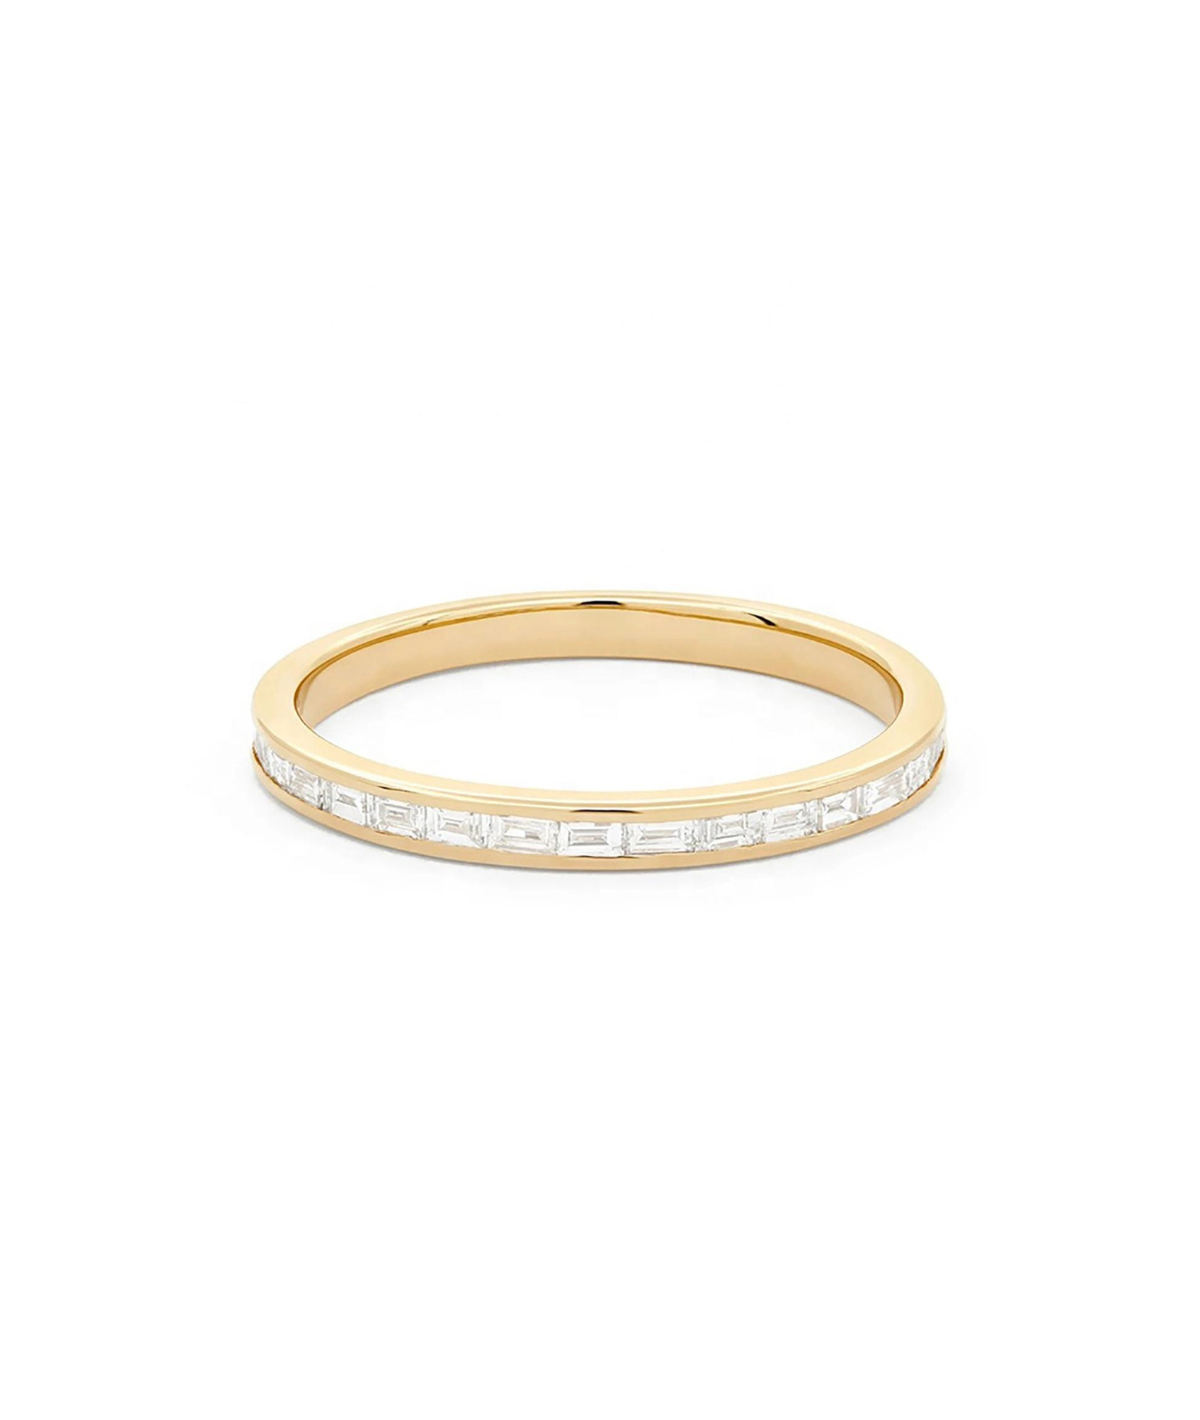 Paige Stacking Ring- Size 7